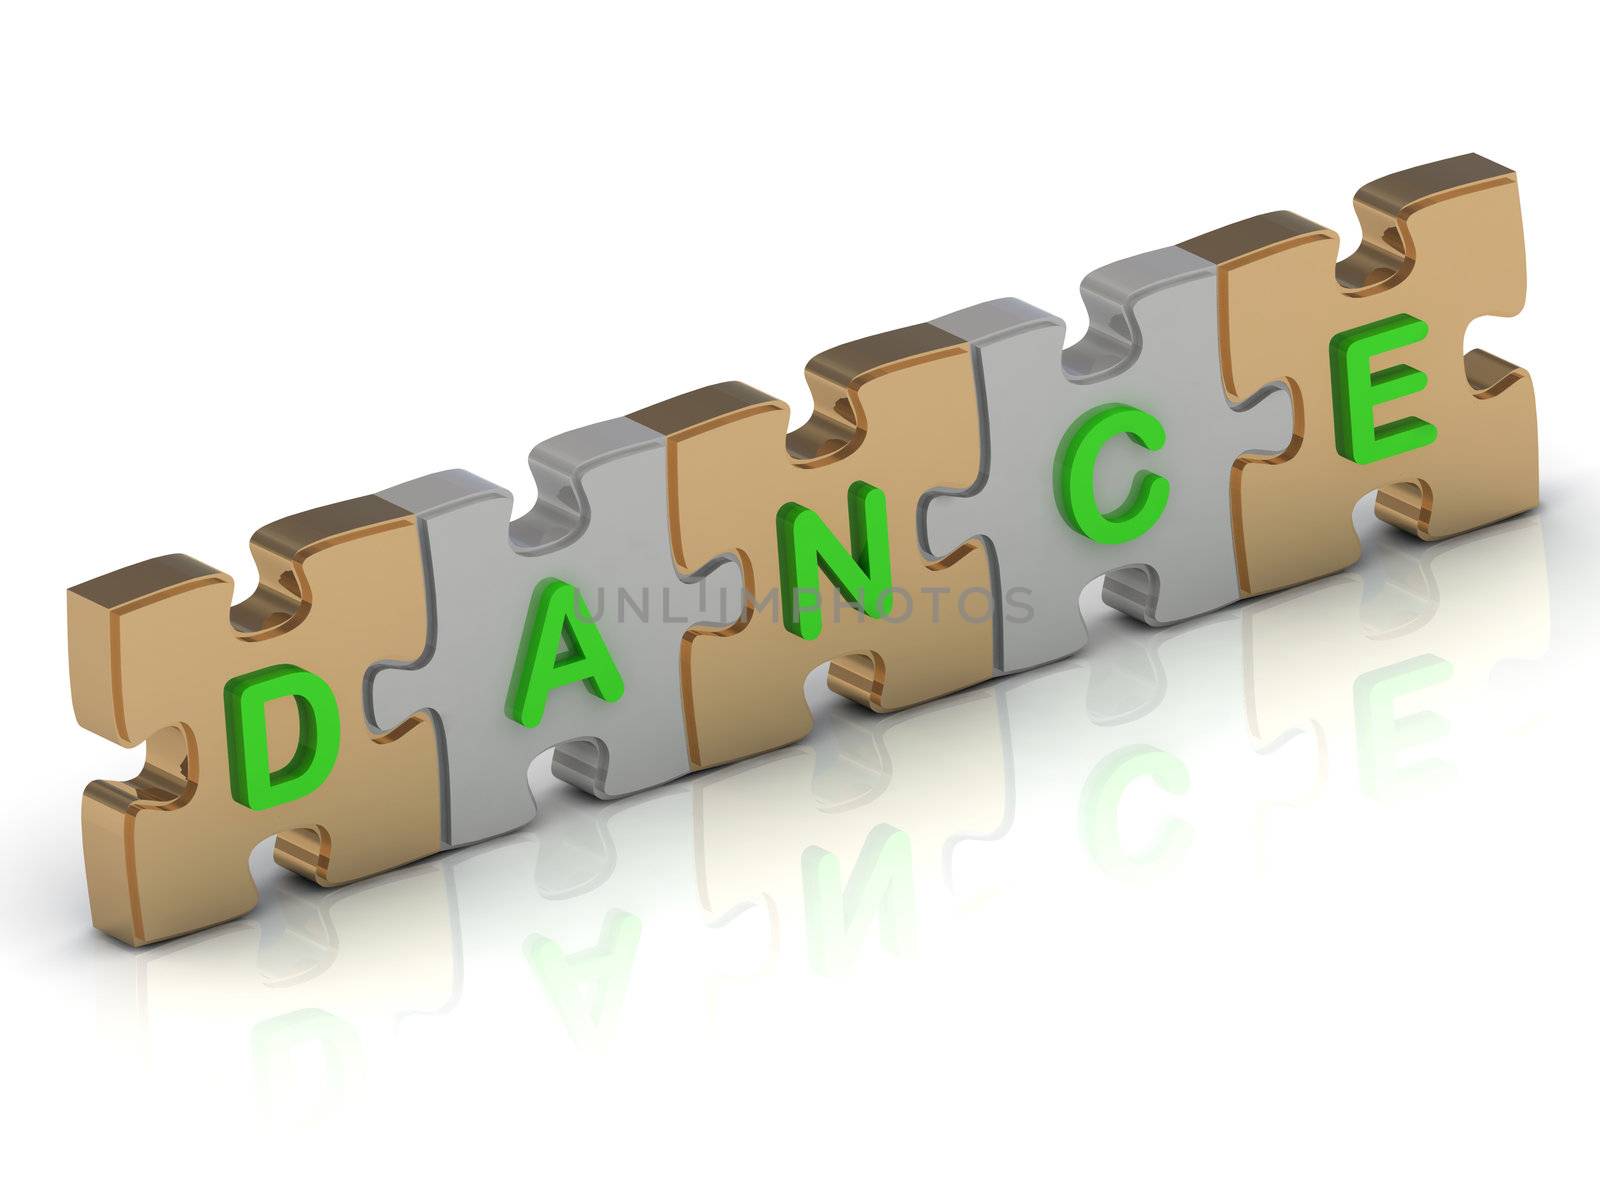 DANCE word of gold puzzle and silver puzzle on a white background